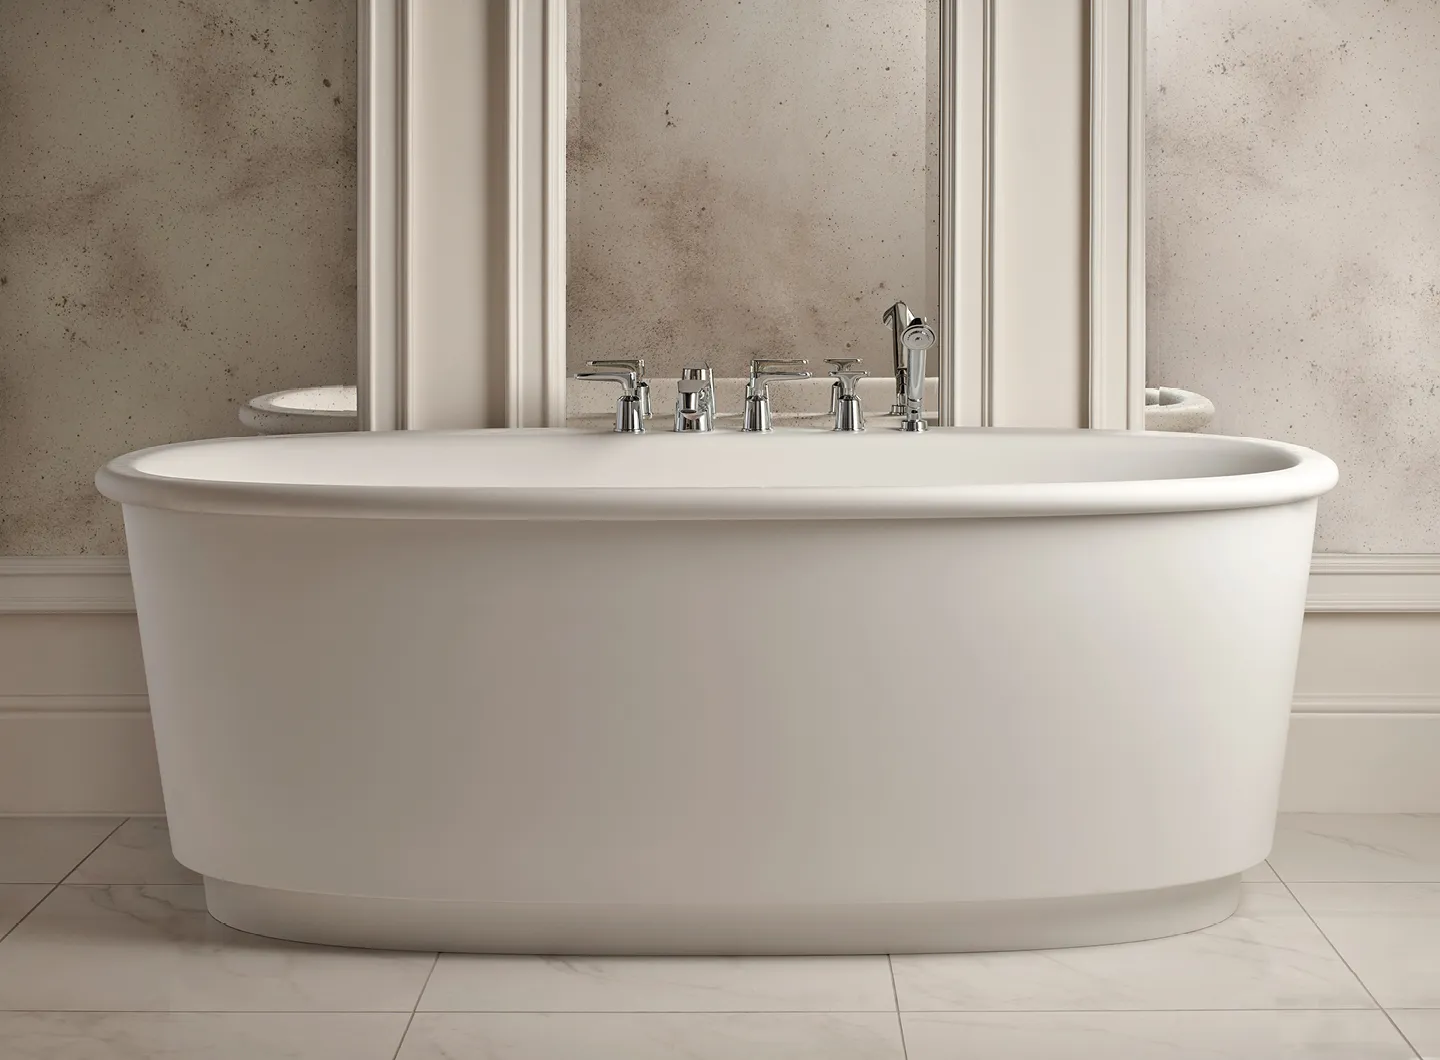 Holiday tub and Twenties taps – Designed in collaboration with Gensler